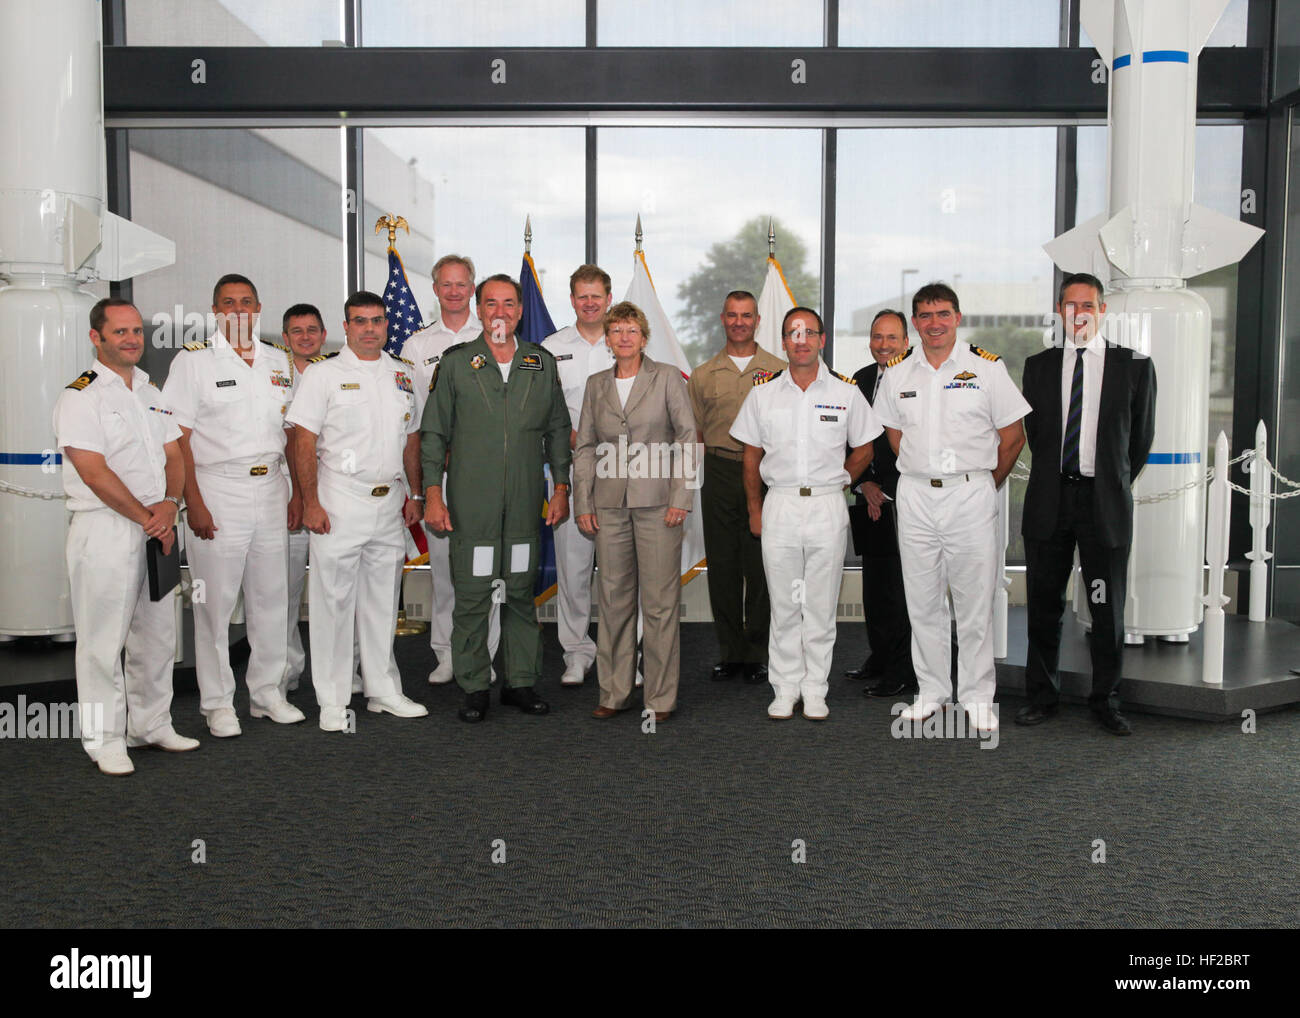 The First Sea Lord and Chief of Naval Staff of the British Royal Navy, Adm. Sir George Zambellas, front row center left, poses for a photo with U.S. Navy officers and civilian personnel during a visit at Naval Surface Warfare Center at Dahlgren, Va., July 29, 2014. Zambellas is taking part in the Commandant of the Marine Corps' Counterpart Program, which invites foreign military leaders to visit the United States and interact with U.S. military leaders. (U.S. Marine Corps photo by Cpl. Michael C. Guinto/Released) First Sea Lord Counterpart Visit 140729-M-LI307-461 Stock Photo